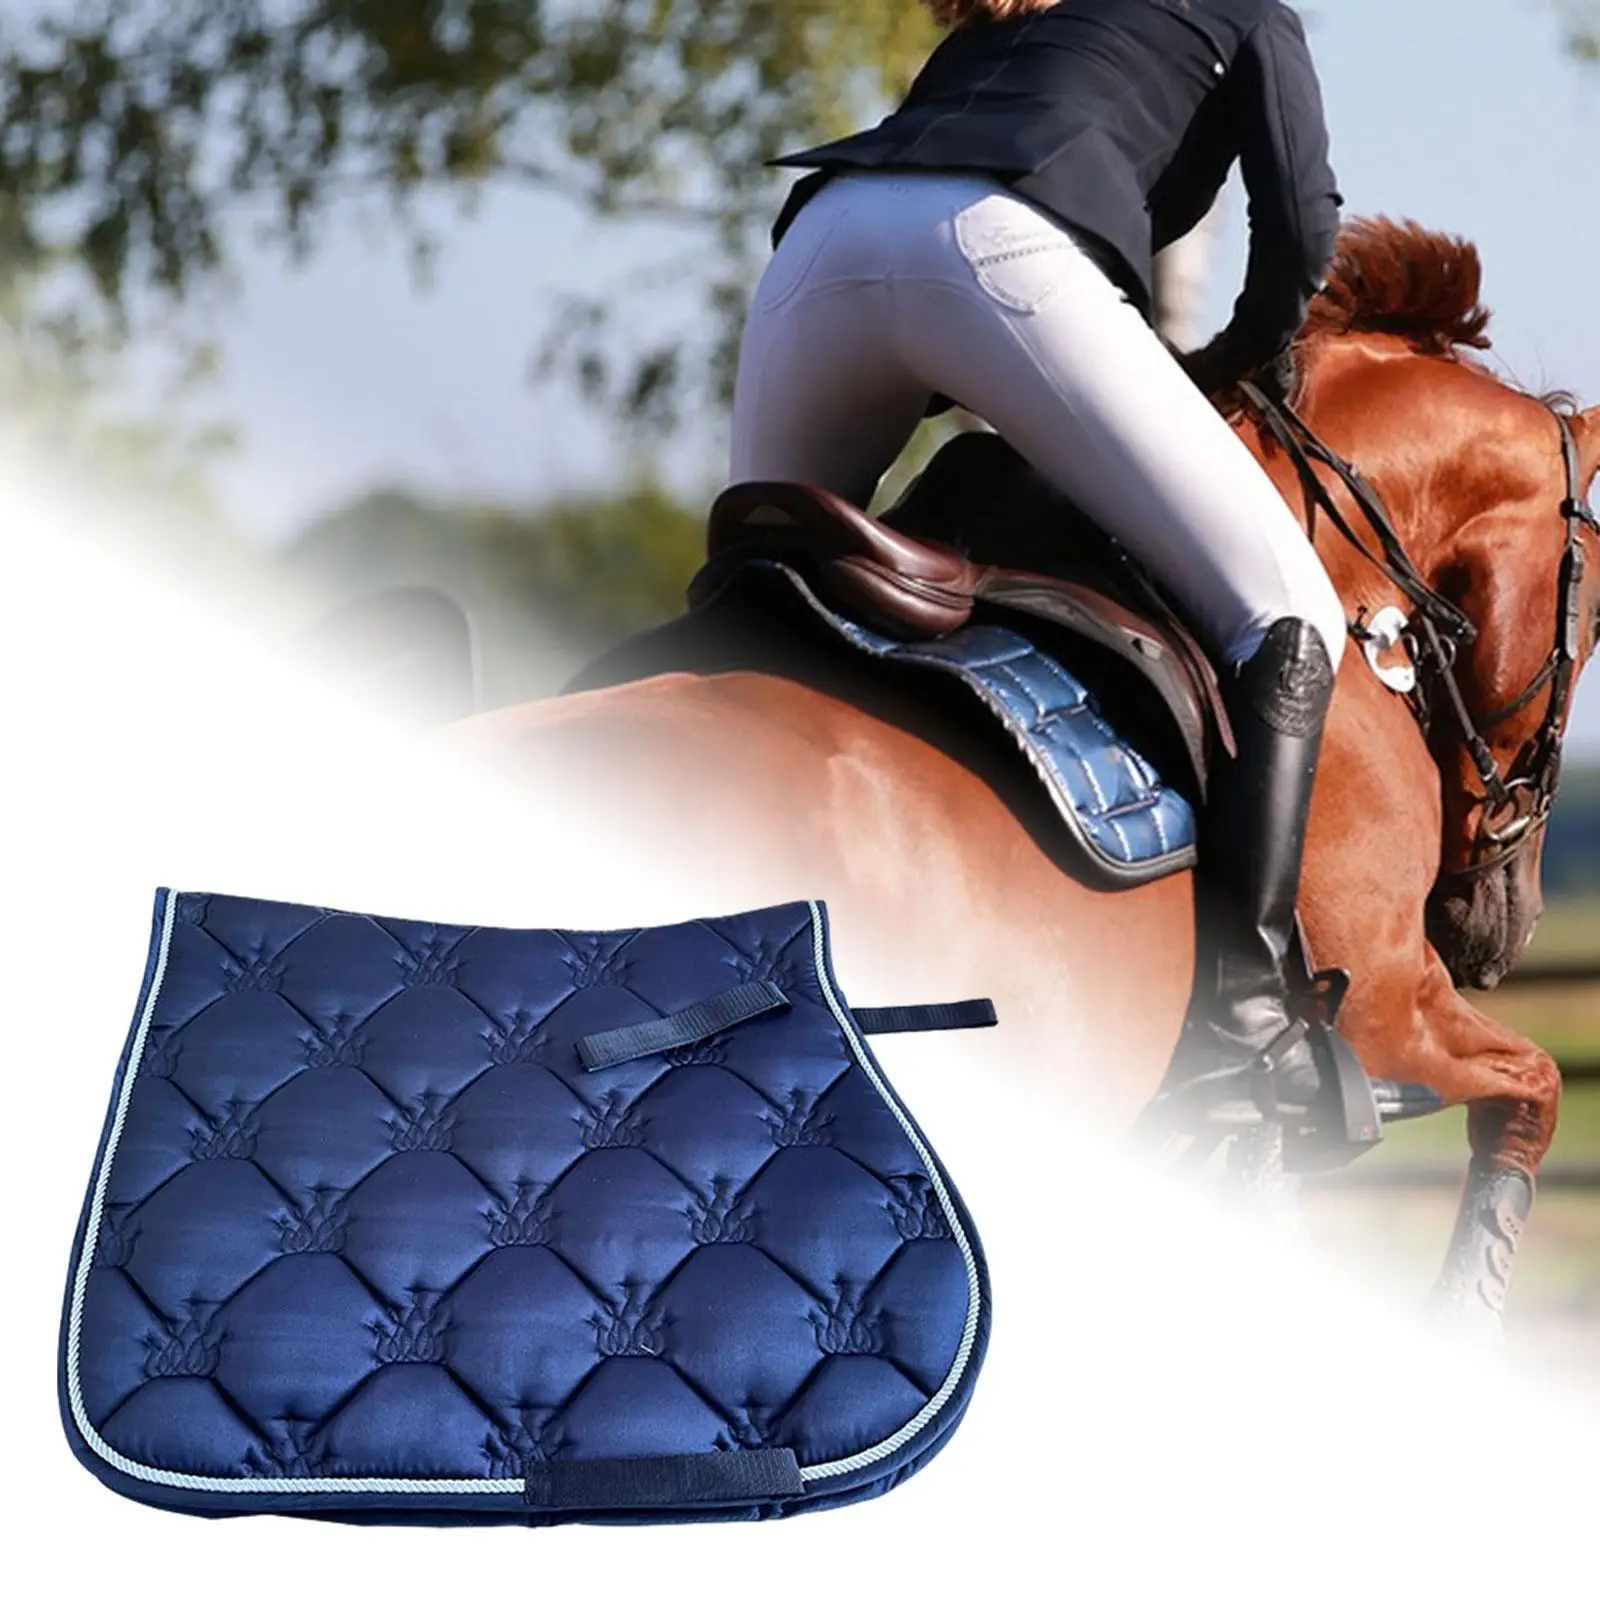 Horse Saddle Pad Protector Breathable Seat Cushion Thickening Riding Sports Lightweight Shock Absorbing Portable Comfort Western